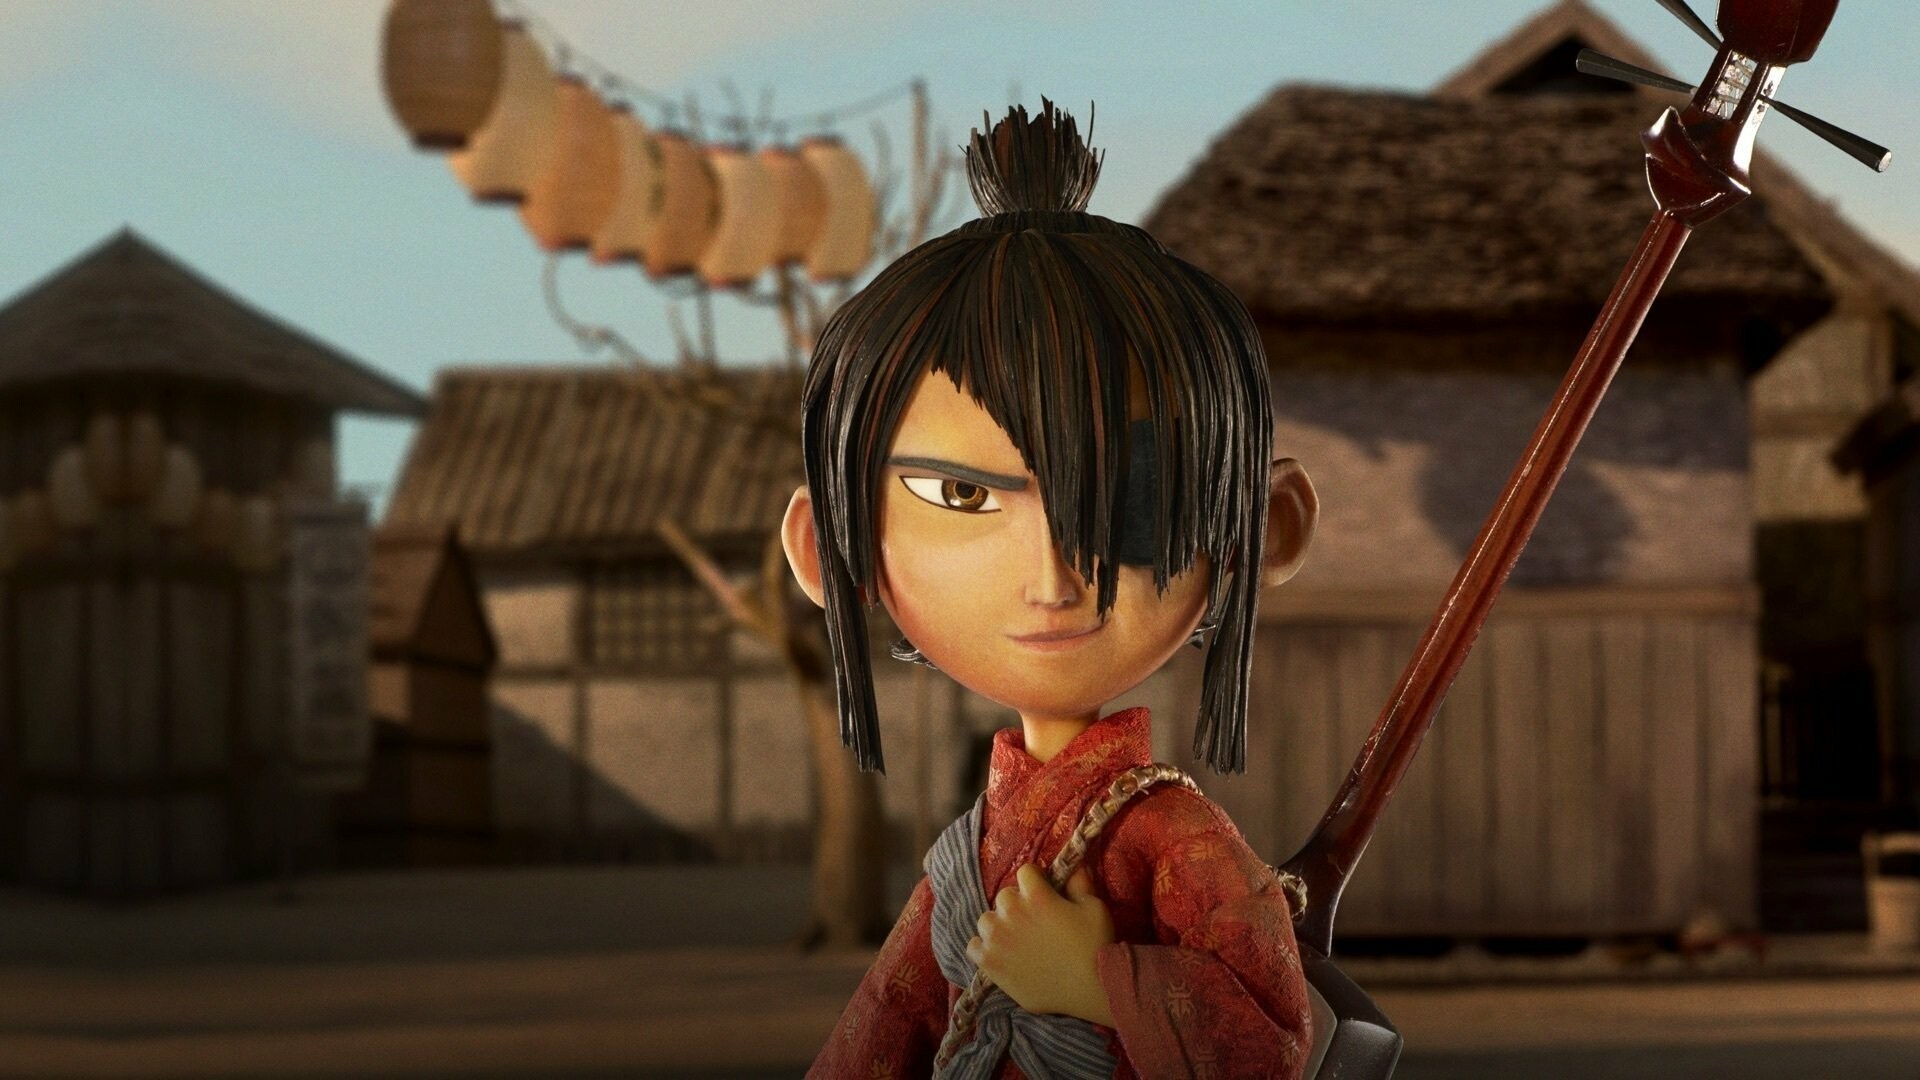 Kubo and the Two Strings: The fantasy story stop-motion animated film, Protagonist. 1920x1080 Full HD Wallpaper.